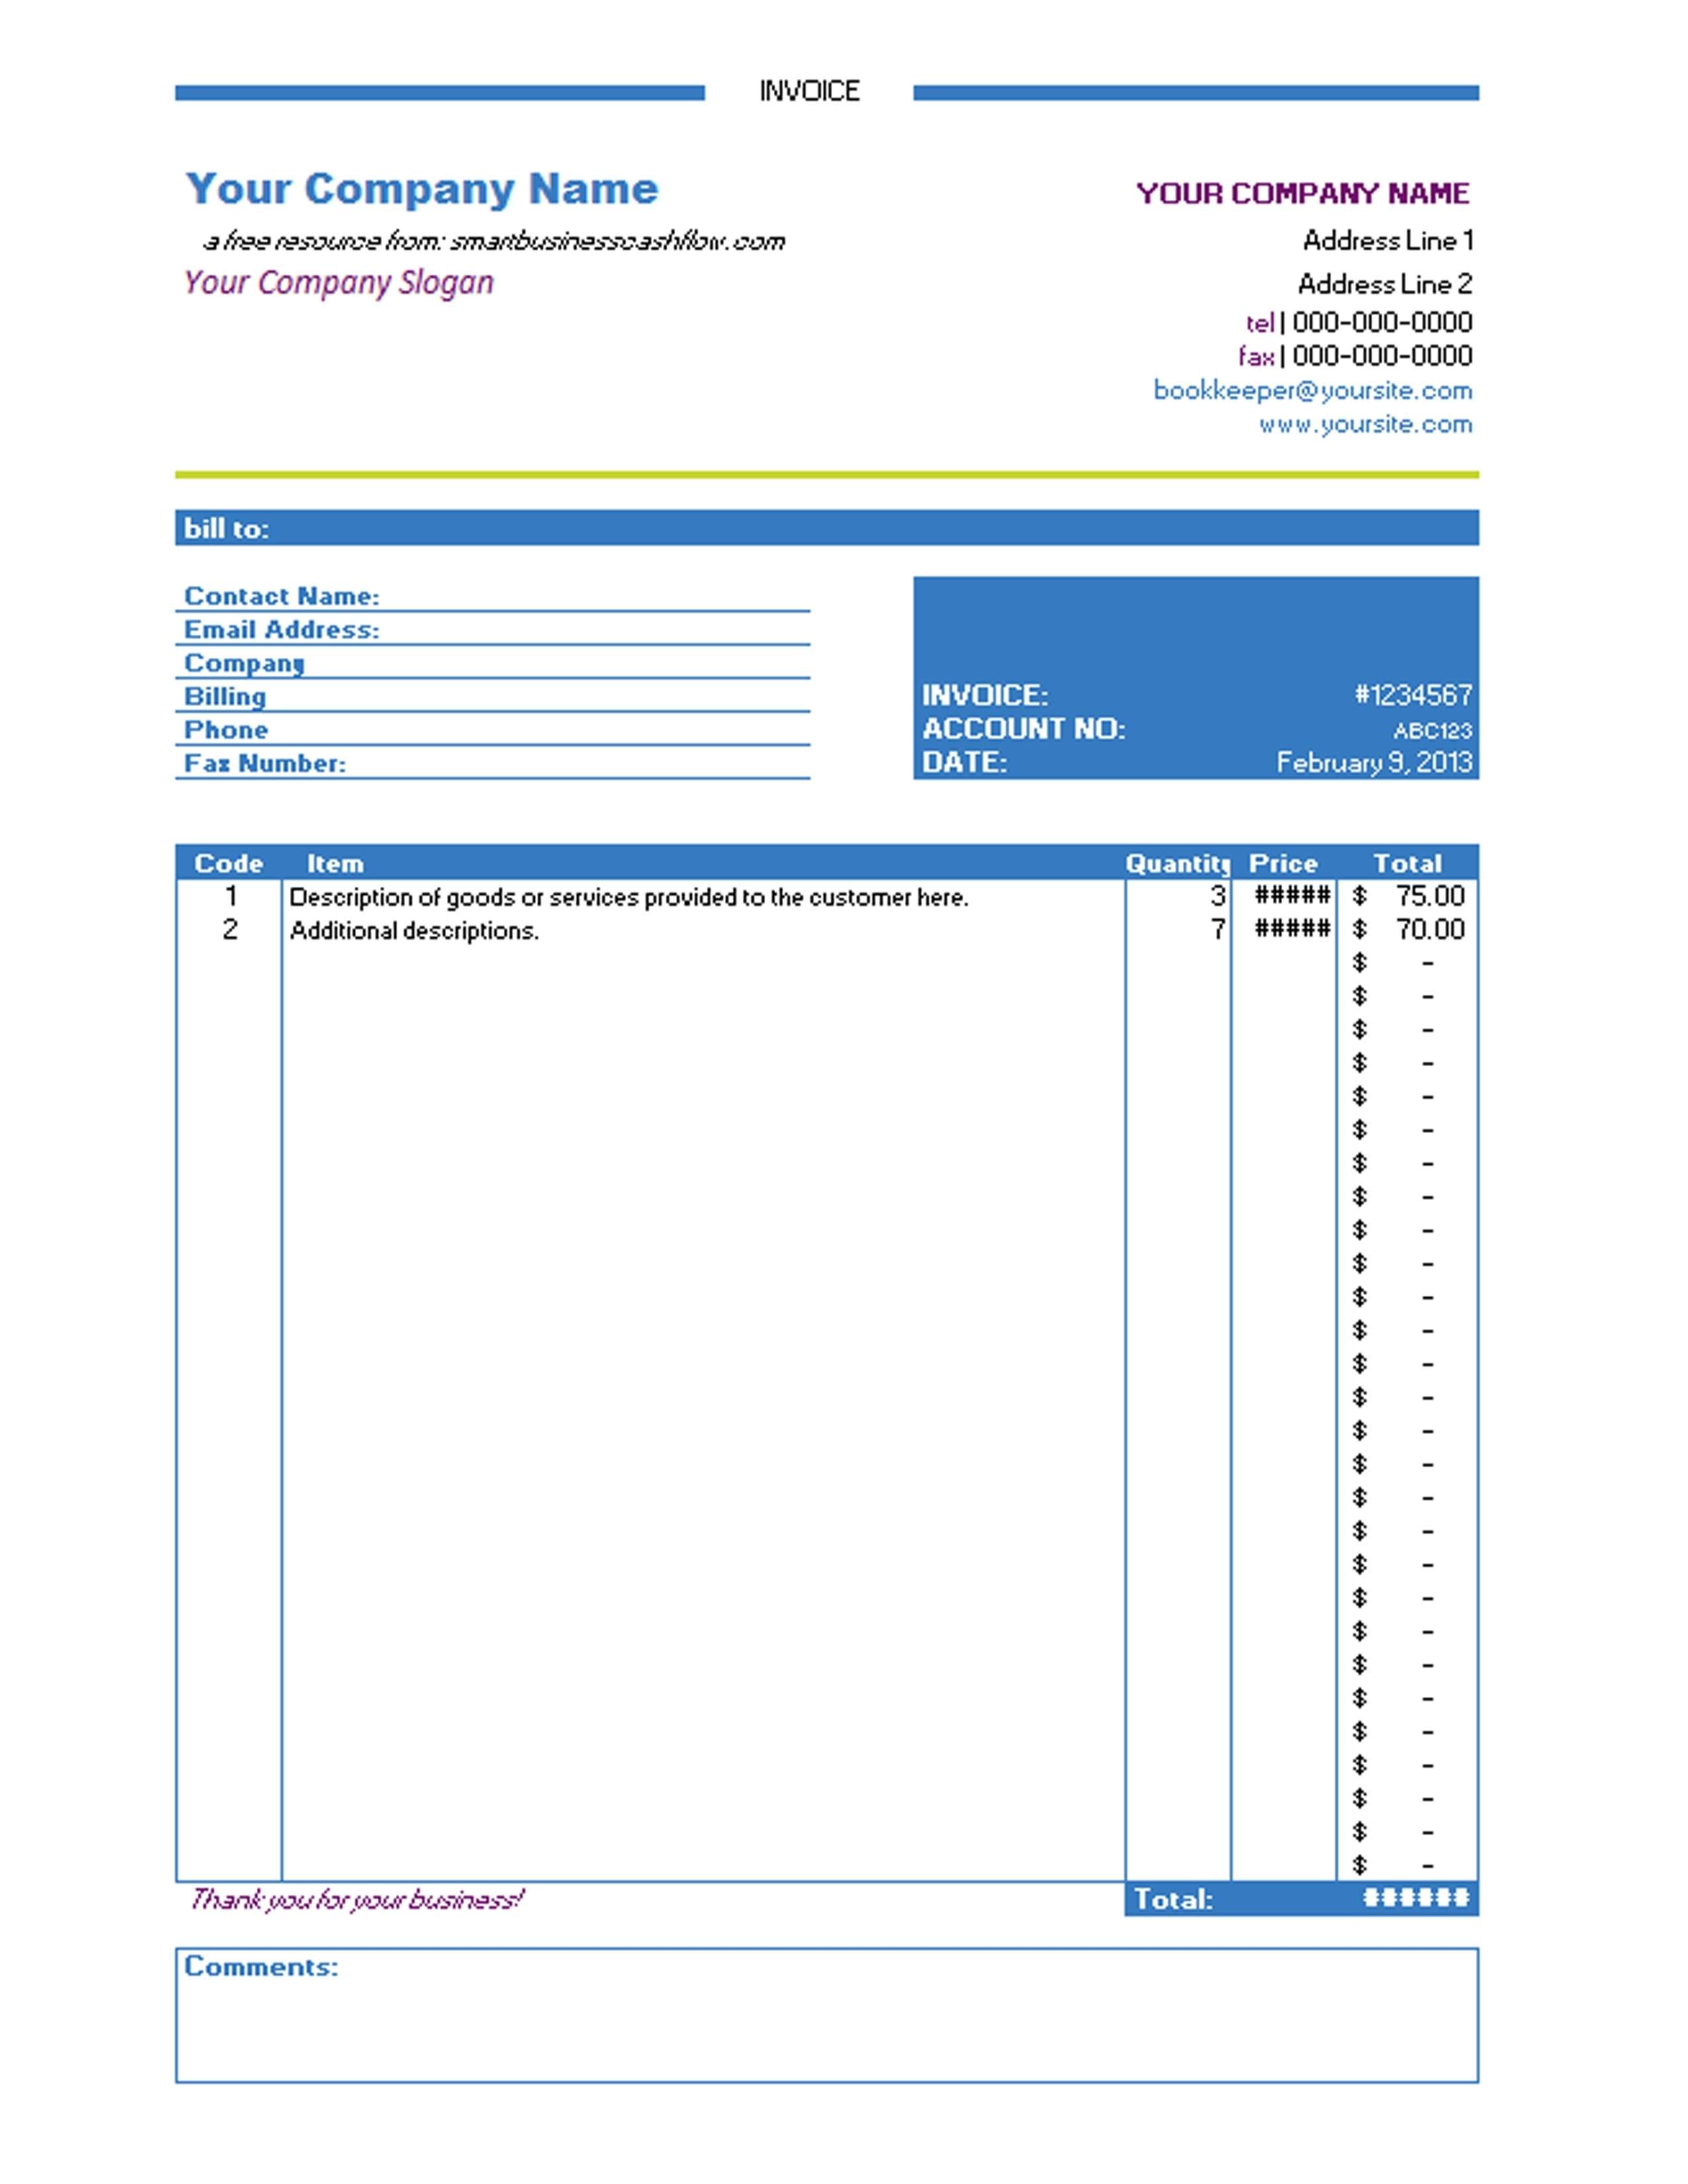 invoice-excel-download-invoice-template-ideas